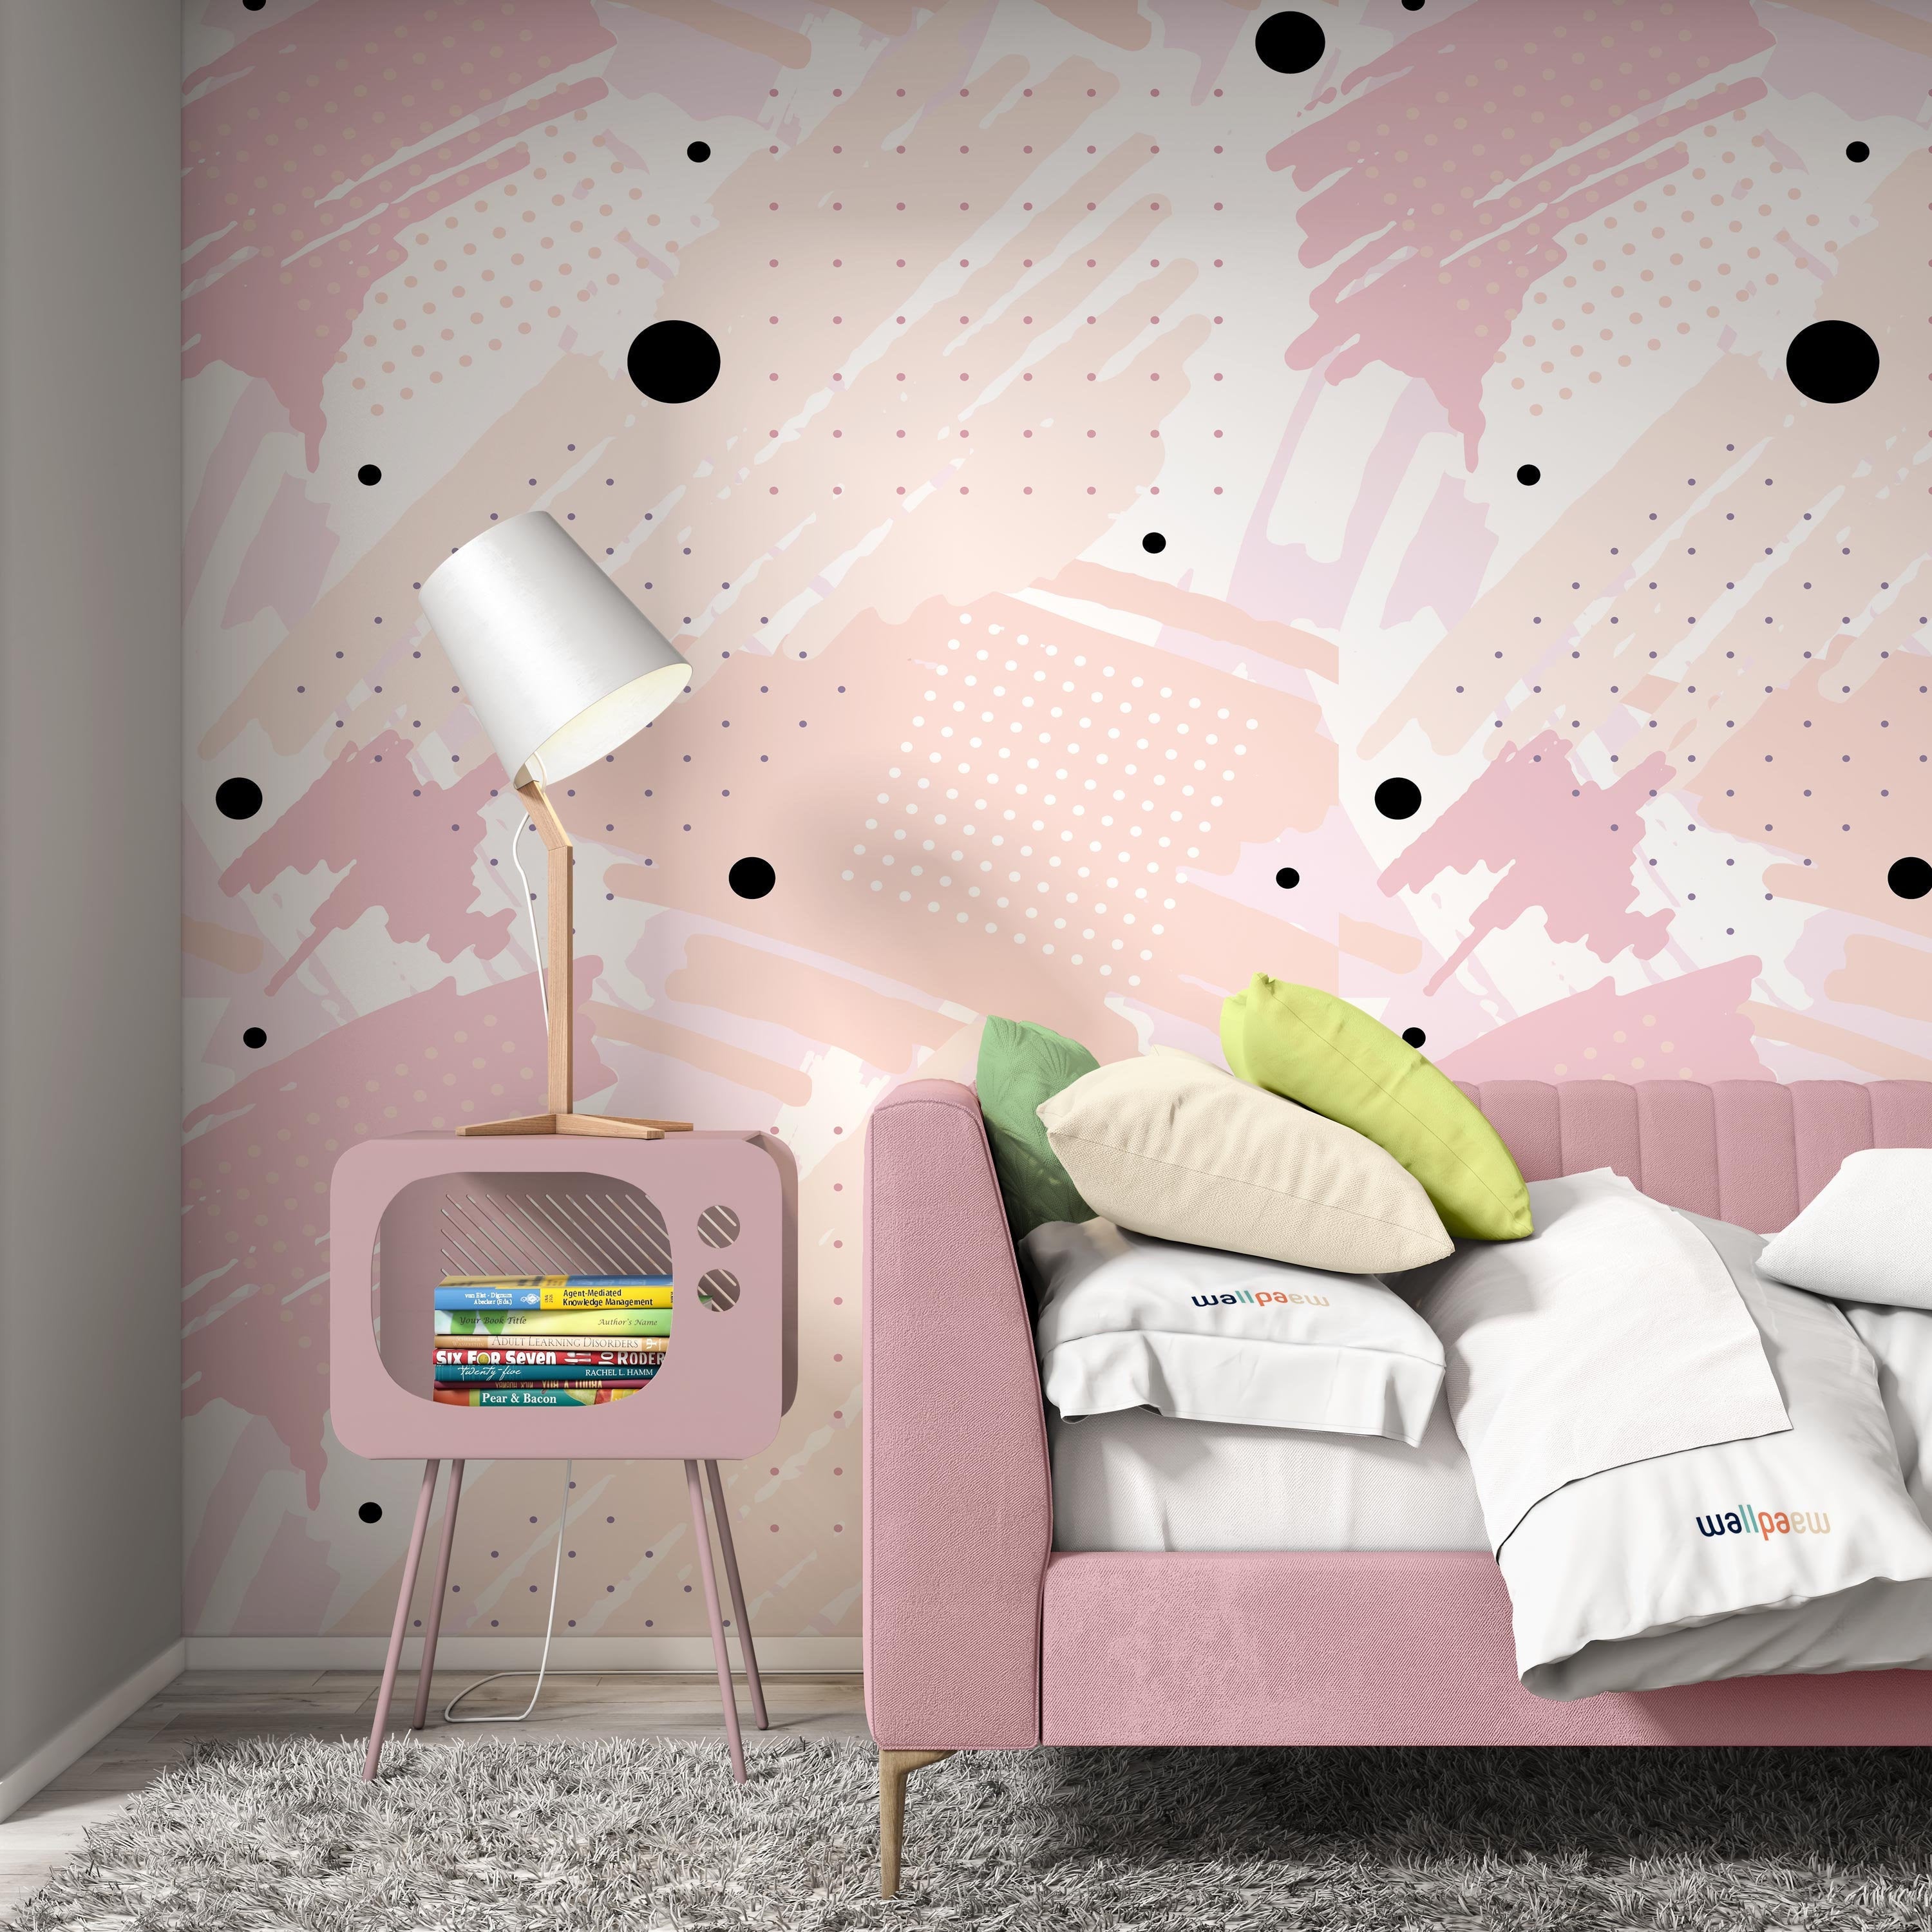 Abstract Background Brush Strokes Black Circles and Dots Wallpaper Self Adhesive Peel and Stick Wall Sticker House Design Removable